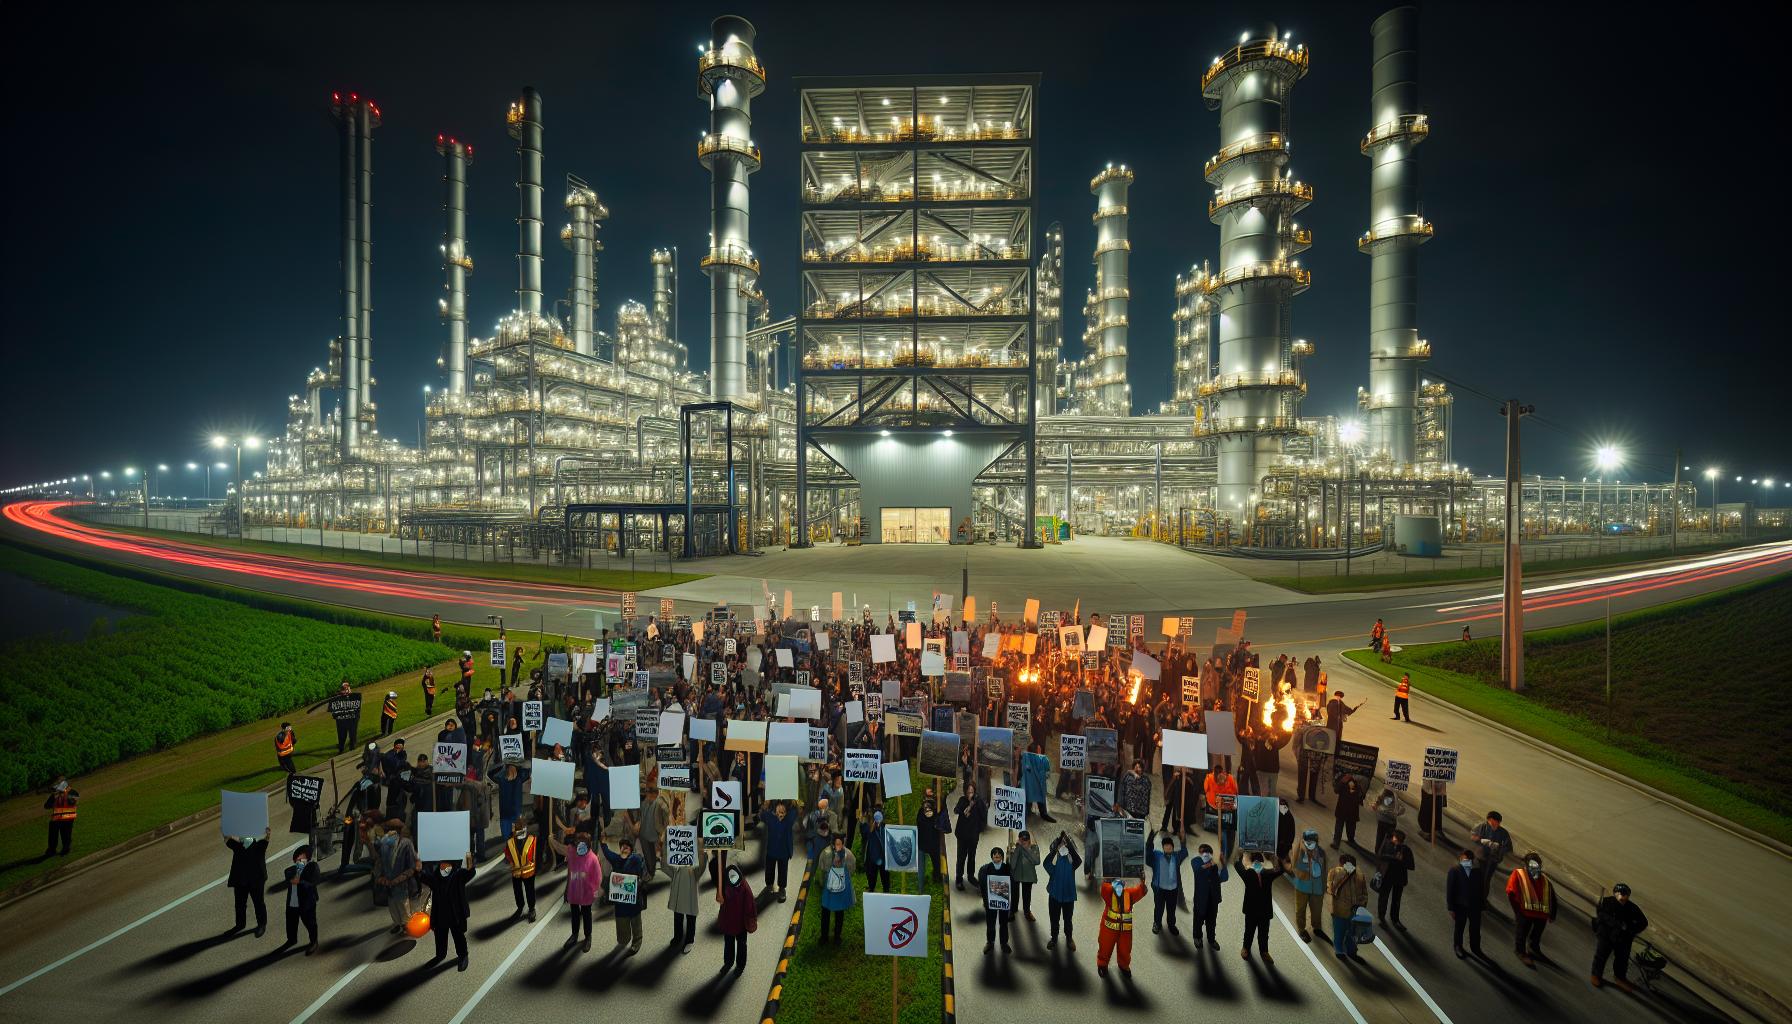 Exxon Mobil sues shareholders over climate proposal | FinOracle